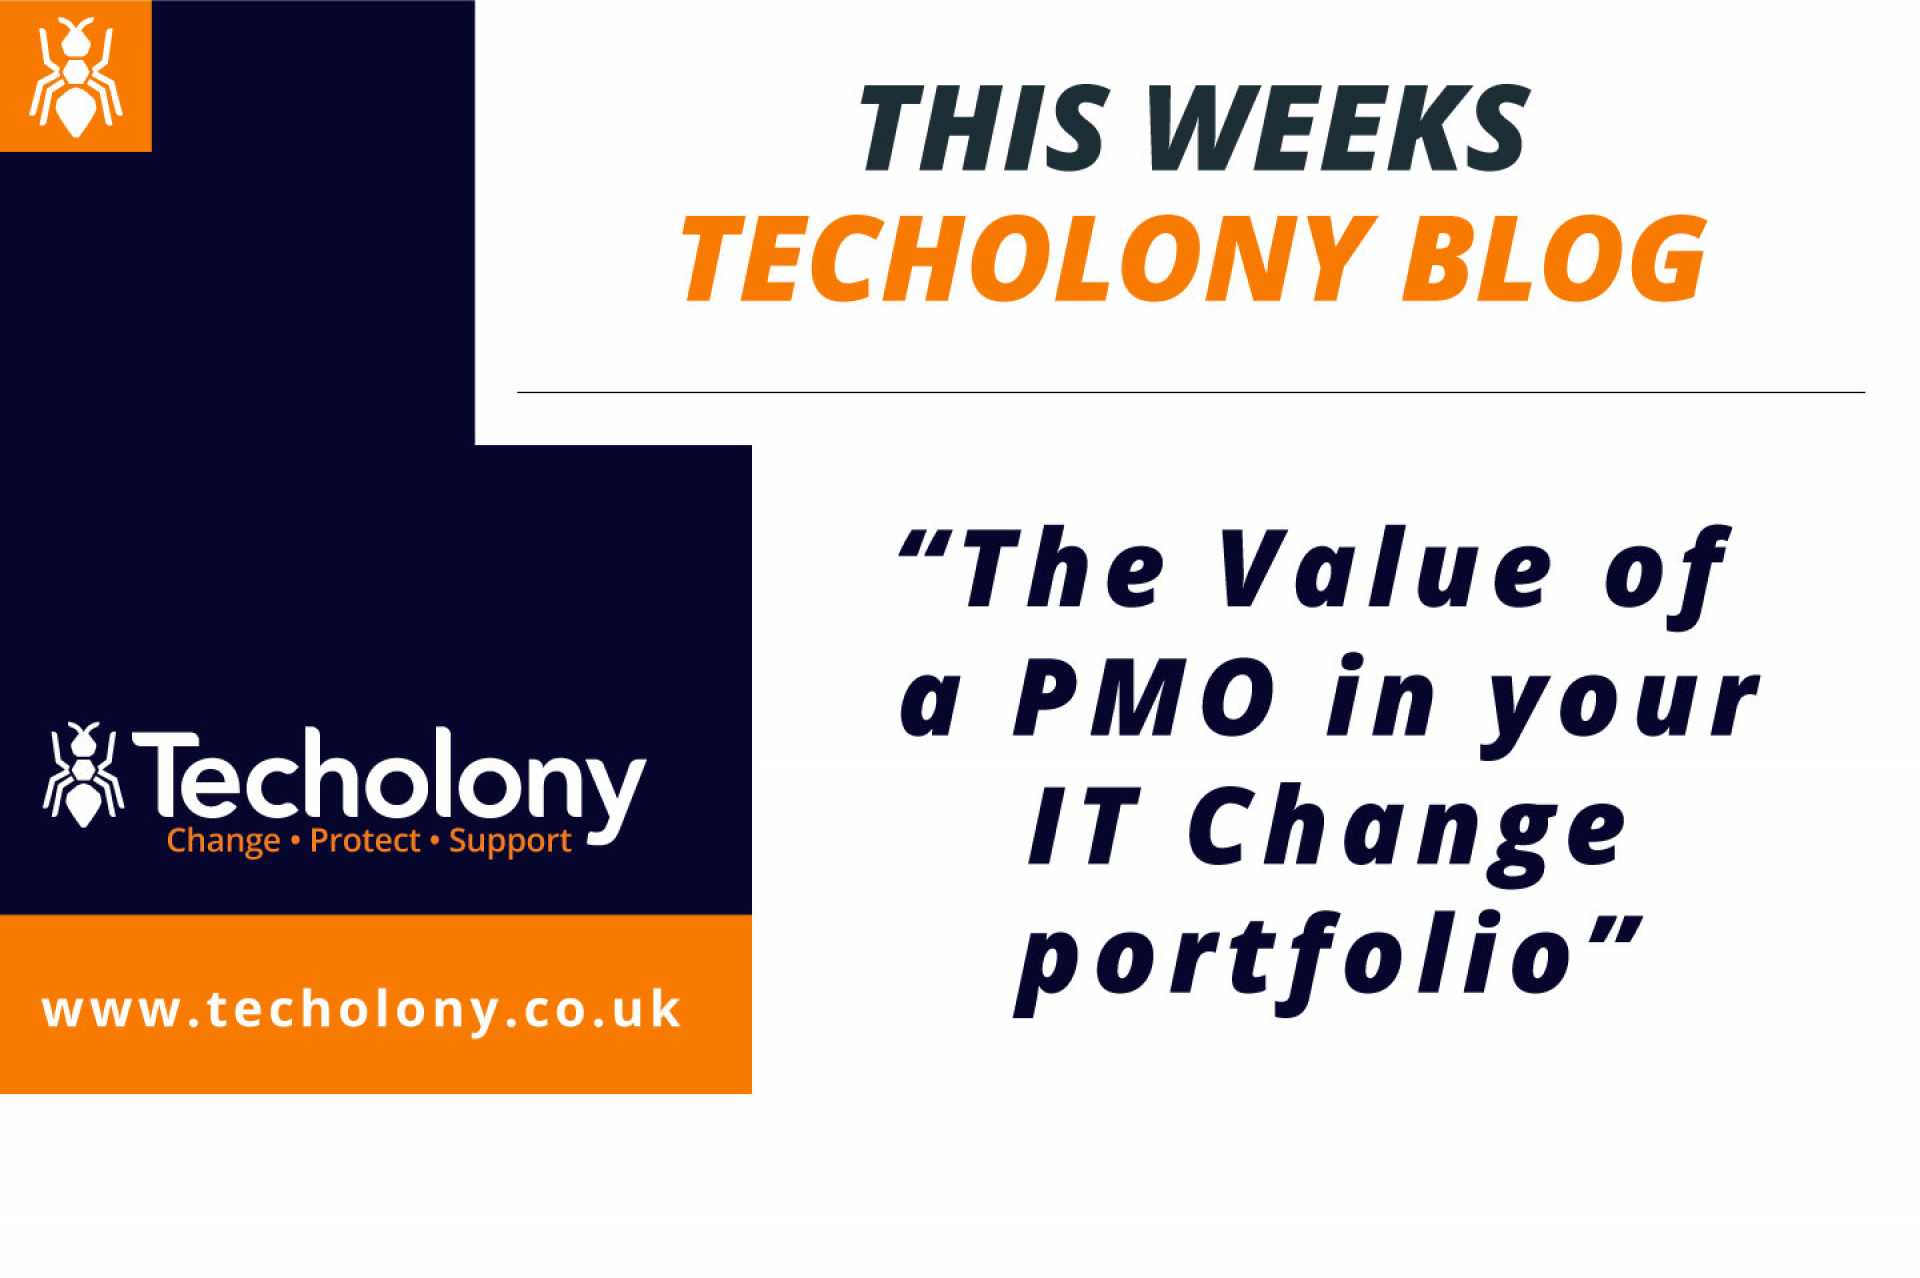 Do you know the value of a PMO in your IT Change Portfolio?